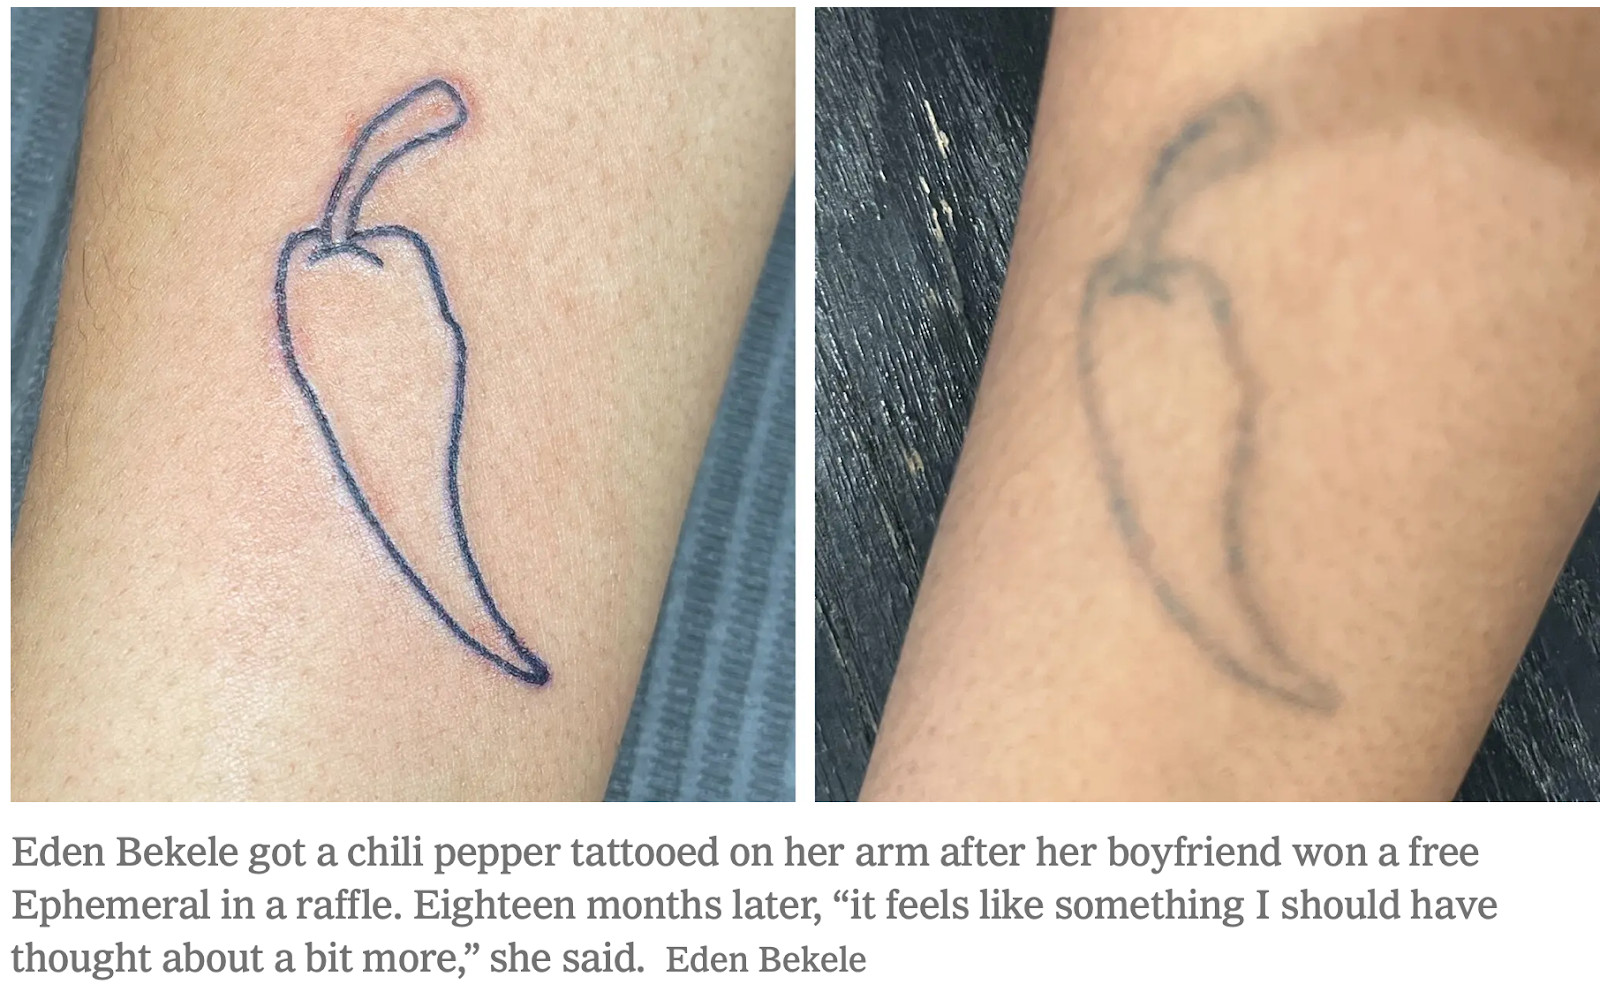 Temporary tattoo firm Ephemeral is condemned over inkings it claimed would  fade after a year | Daily Mail Online